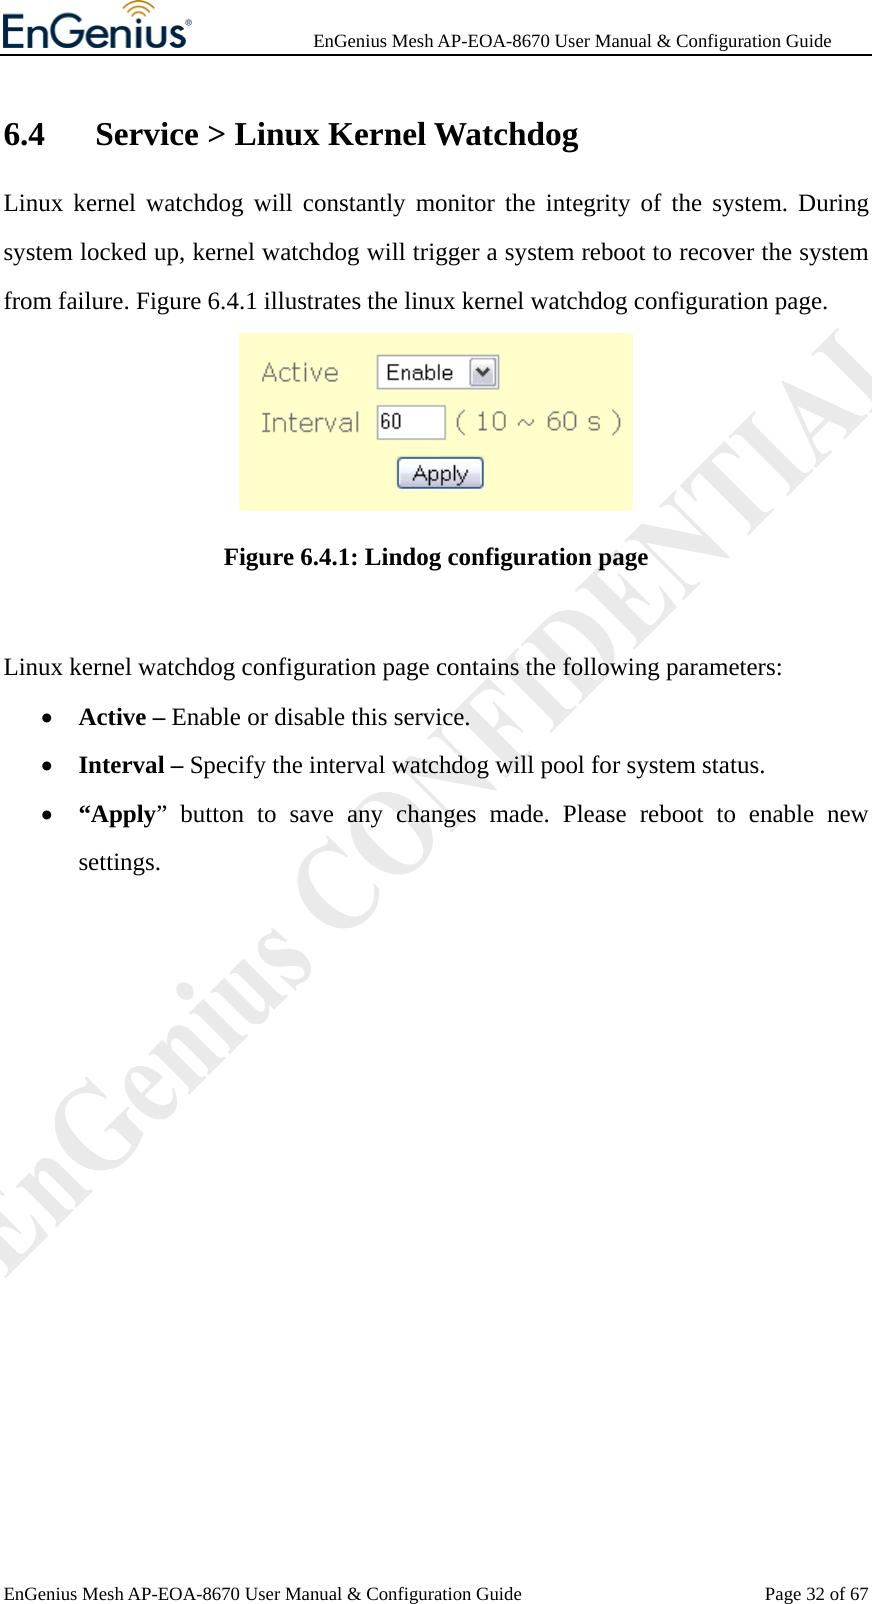              EnGenius Mesh AP-EOA-8670 User Manual &amp; Configuration Guide EnGenius Mesh AP-EOA-8670 User Manual &amp; Configuration Guide  Page 32 of 676.4   Service &gt; Linux Kernel Watchdog Linux kernel watchdog will constantly monitor the integrity of the system. During system locked up, kernel watchdog will trigger a system reboot to recover the system from failure. Figure 6.4.1 illustrates the linux kernel watchdog configuration page.  Figure 6.4.1: Lindog configuration page  Linux kernel watchdog configuration page contains the following parameters: • Active – Enable or disable this service. • Interval – Specify the interval watchdog will pool for system status. • “Apply” button to save any changes made. Please reboot to enable new settings.  